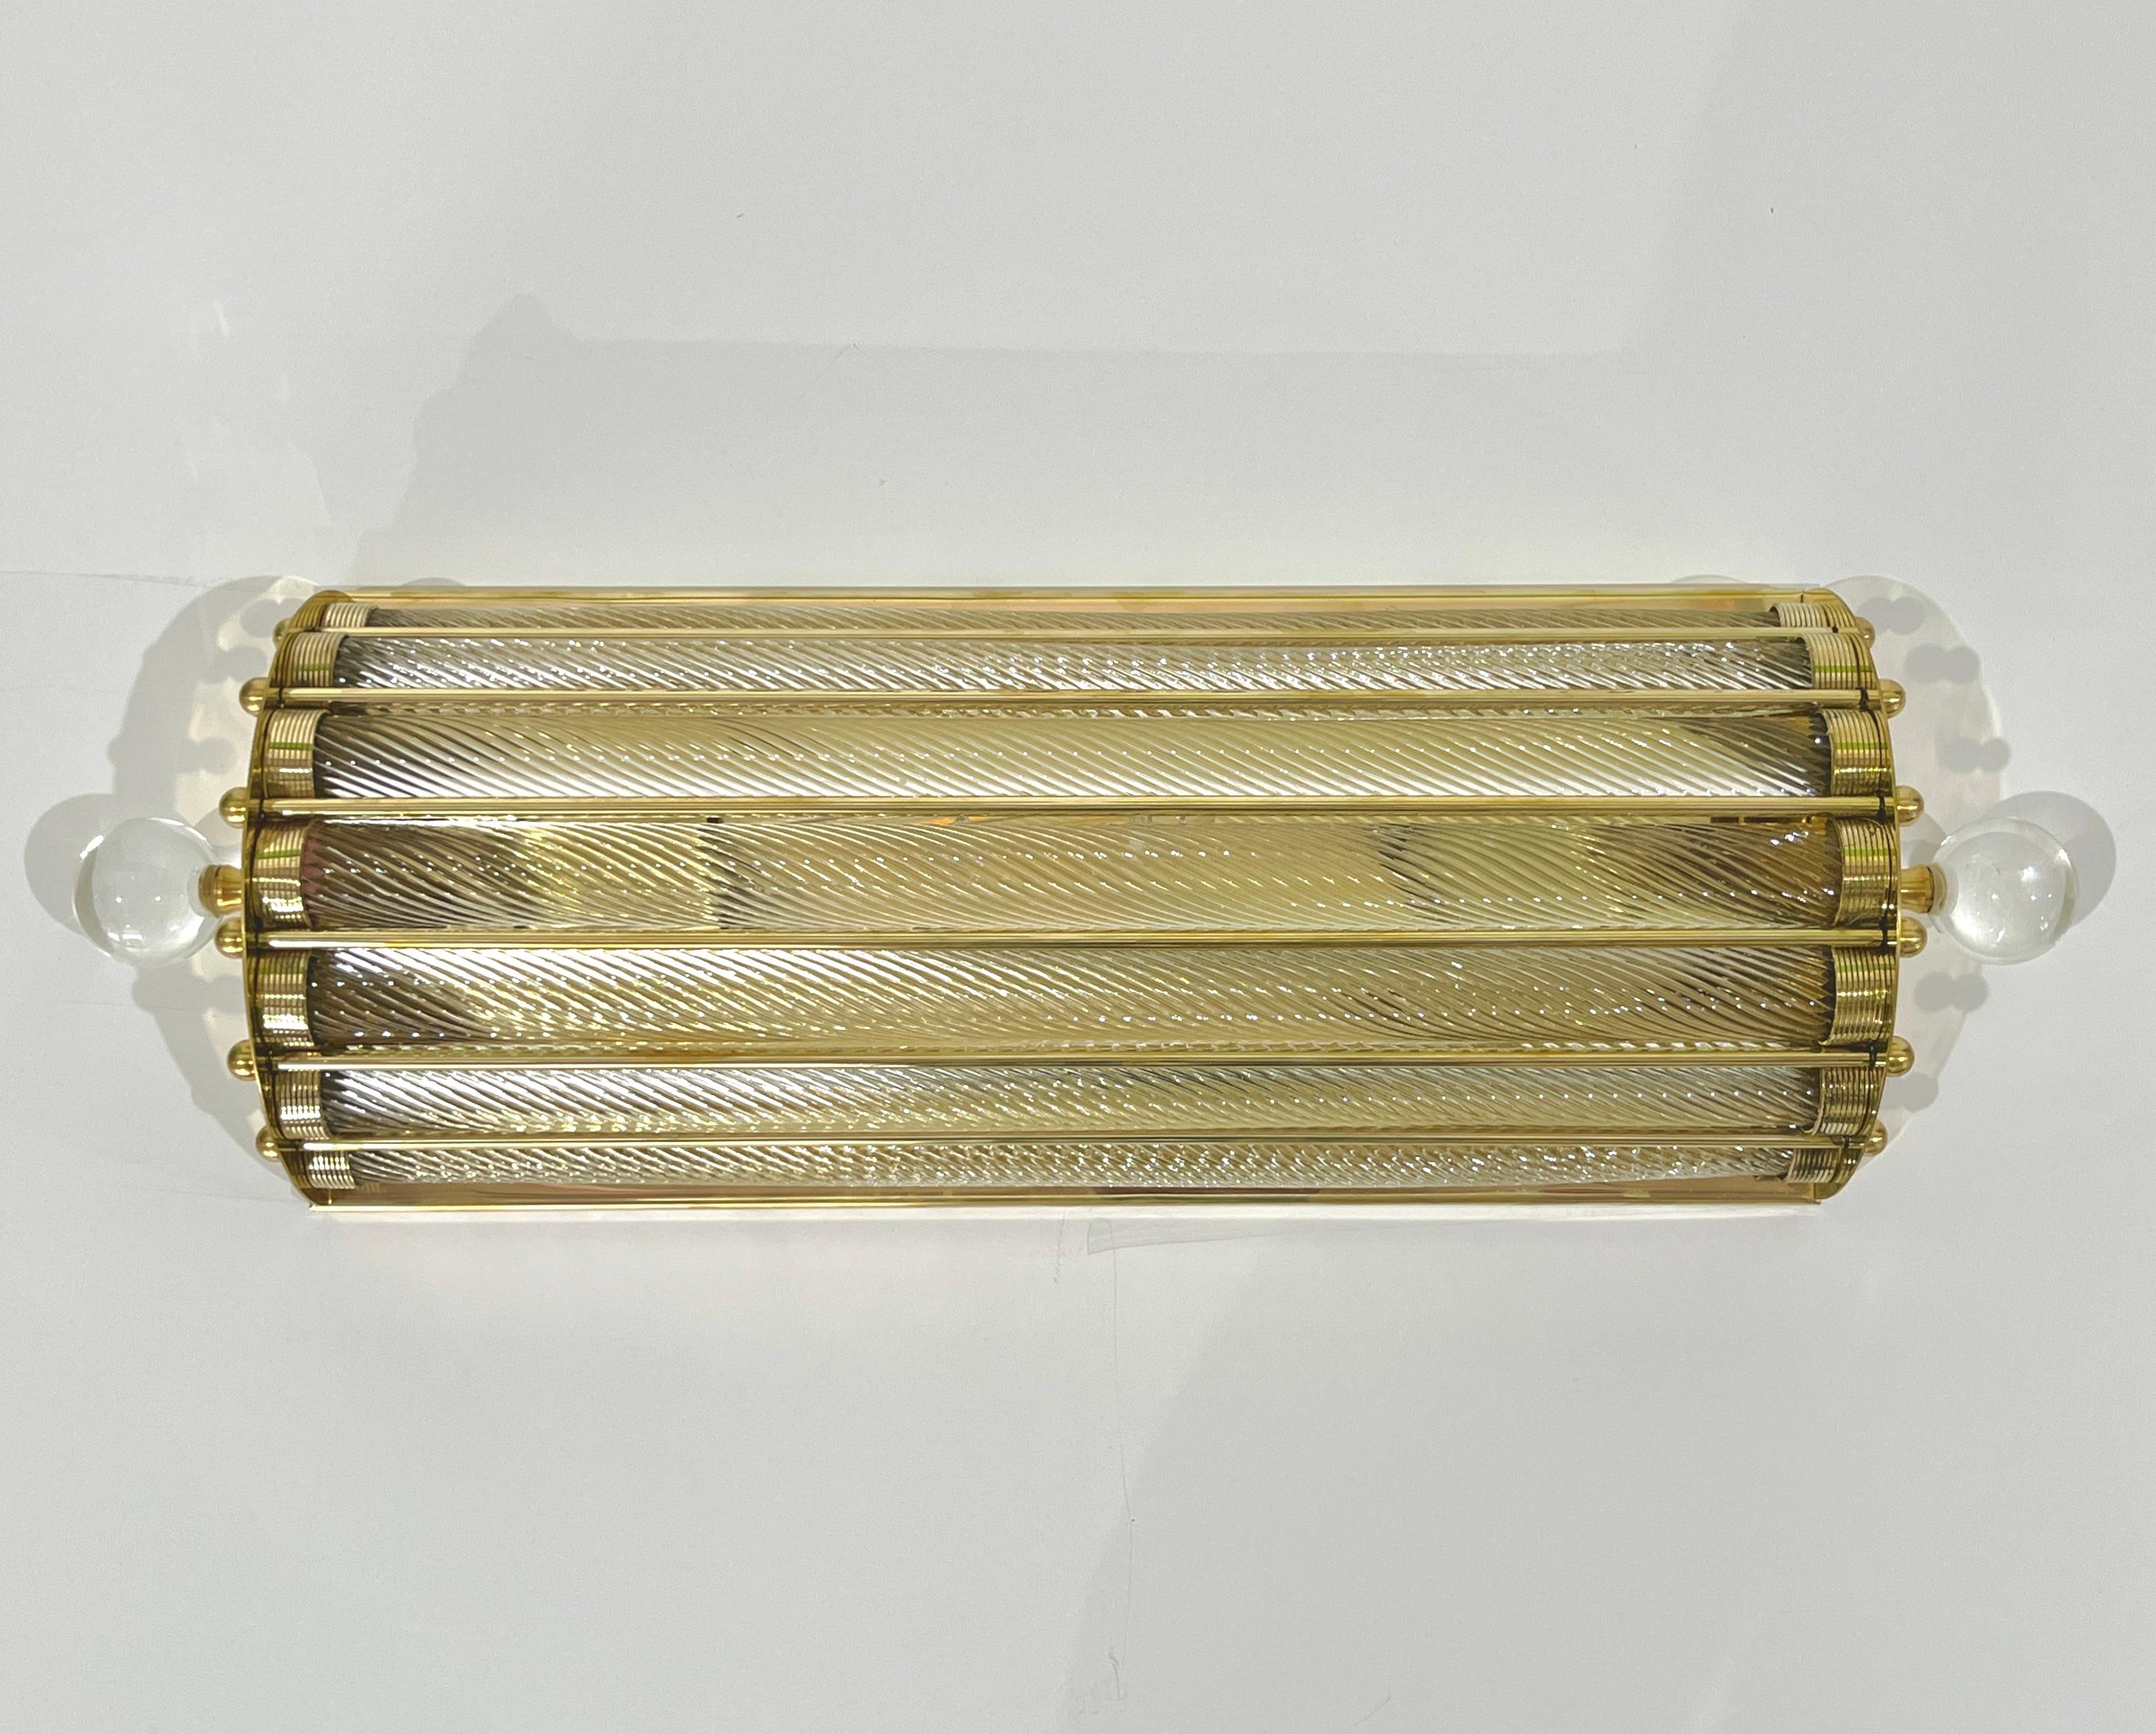 Contemporary customizable Italian Art Deco design pair of semi-circular wall lights or flush mounts, entirely handcrafted in brass. The nicely scalloped airy brass structure supports 7 crystal clear Murano glass rods worked with the sophisticated